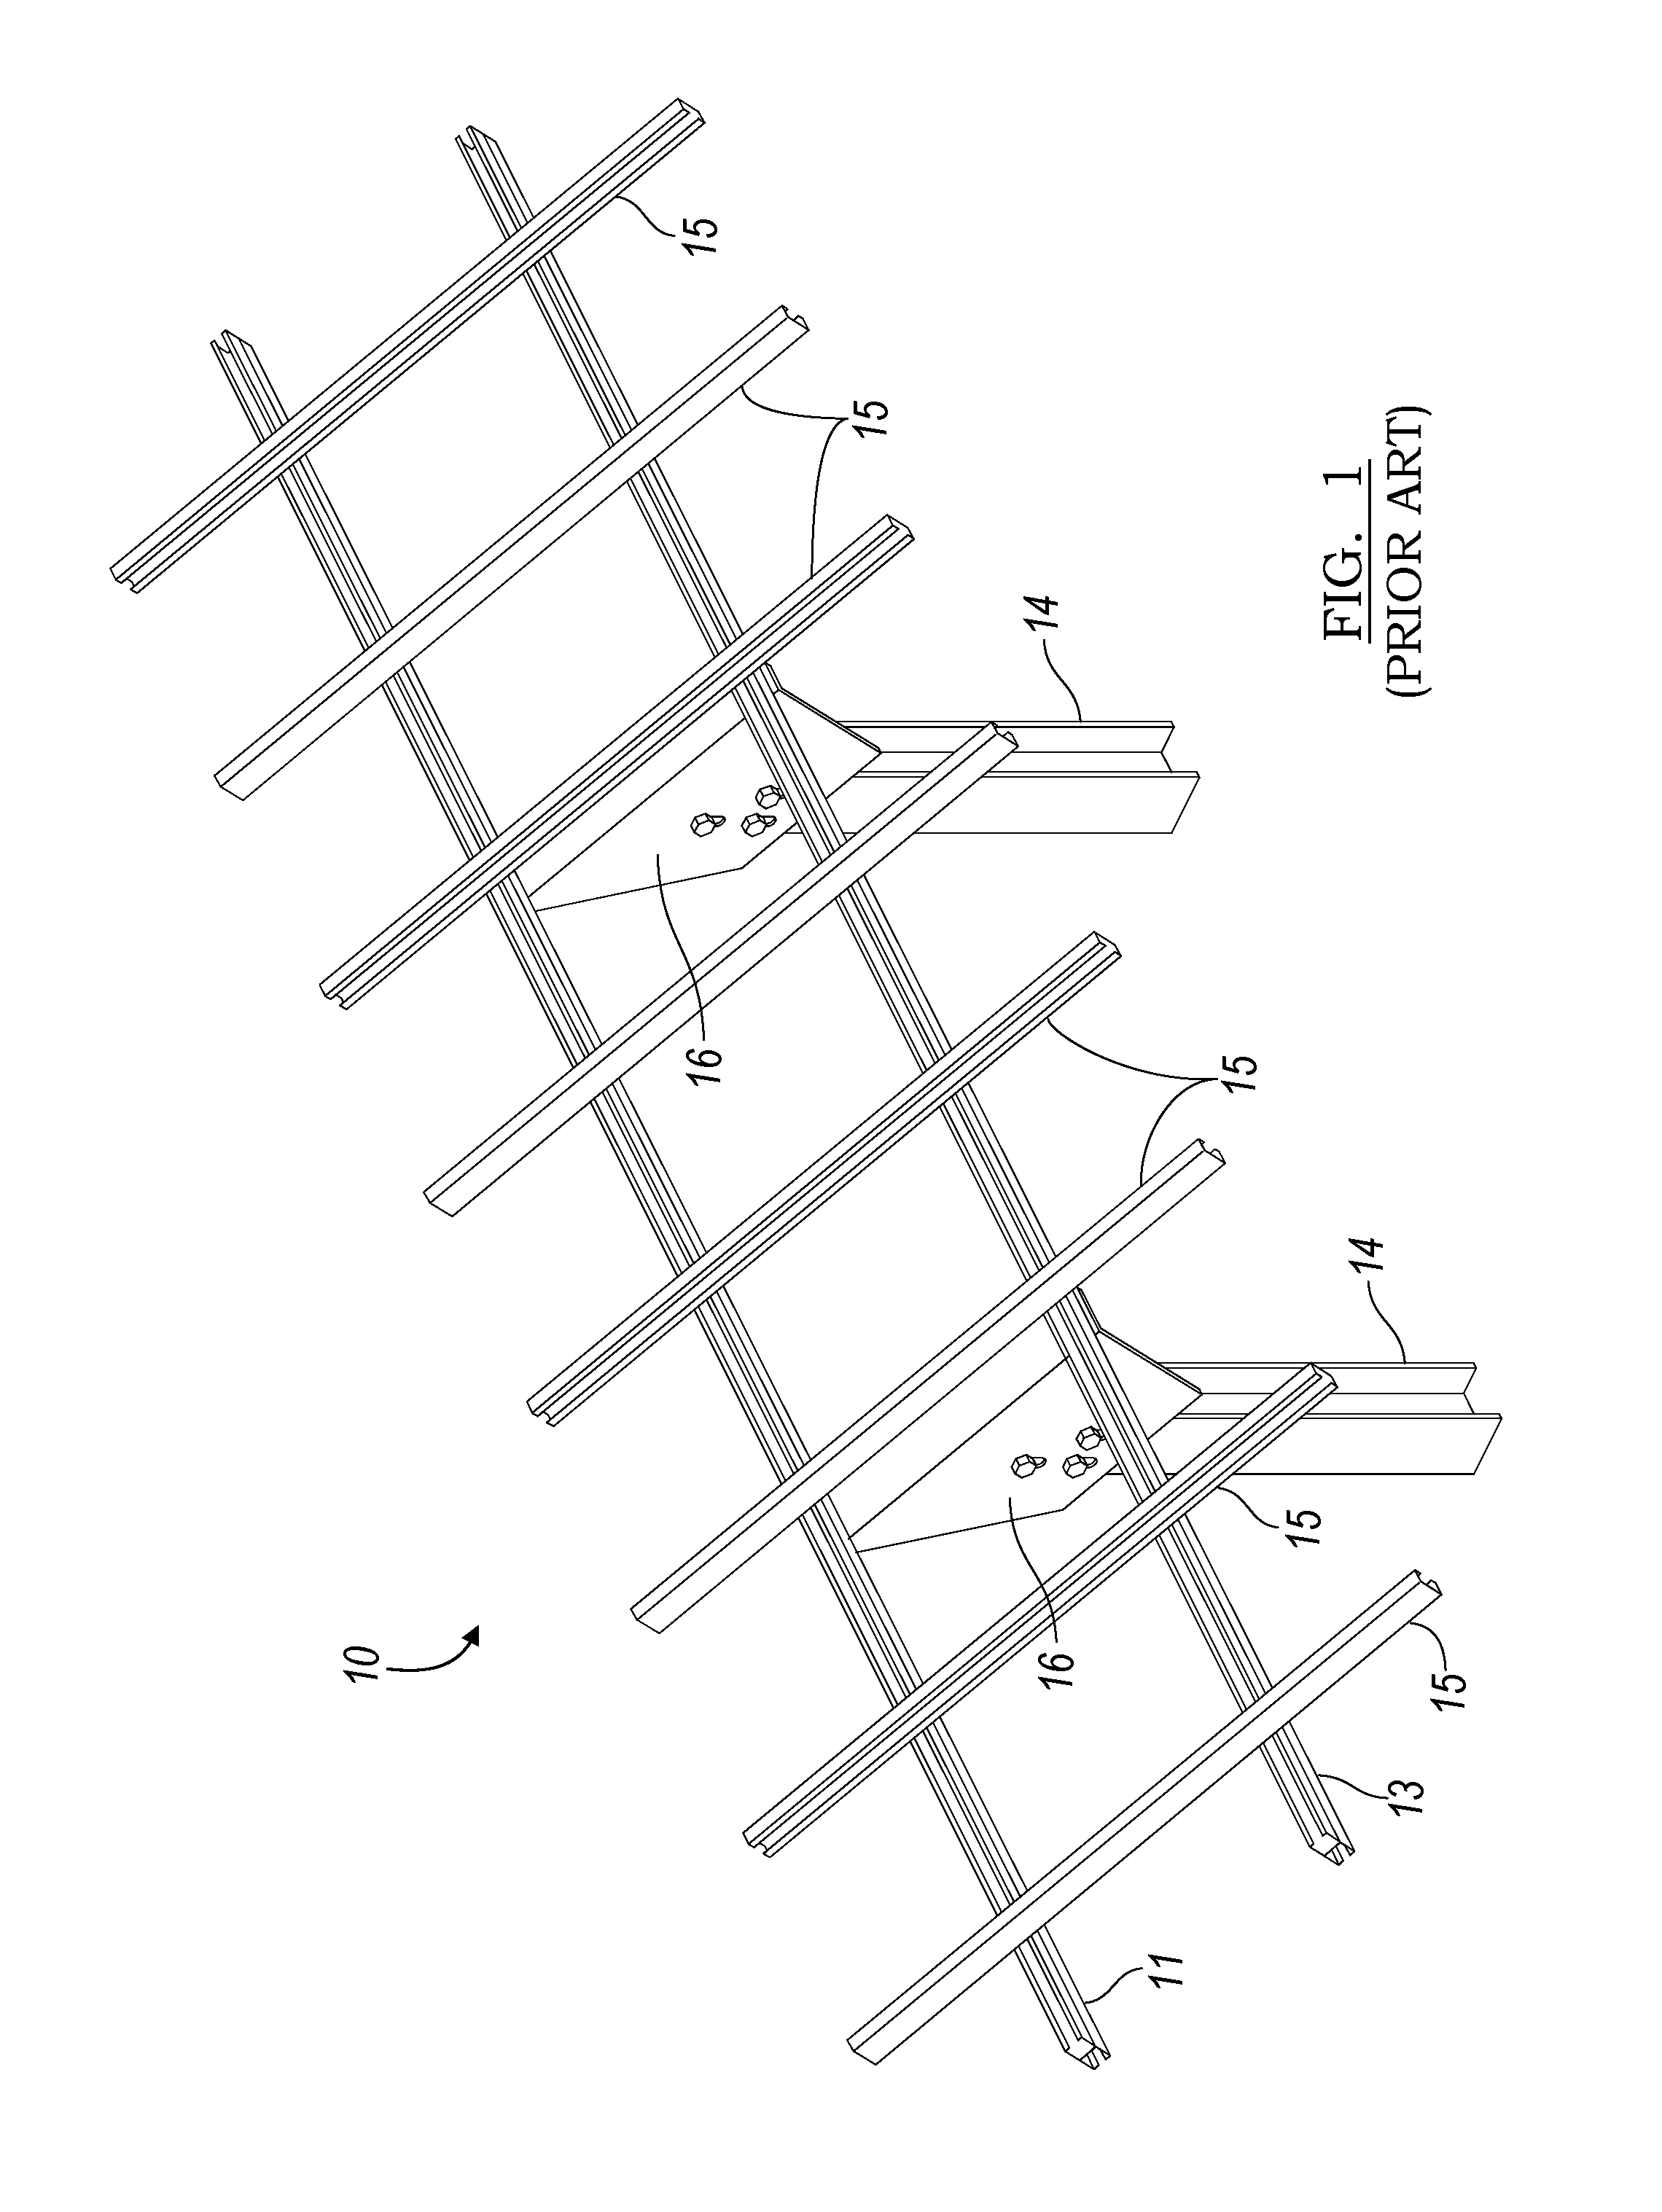 Support System for Solar Panels